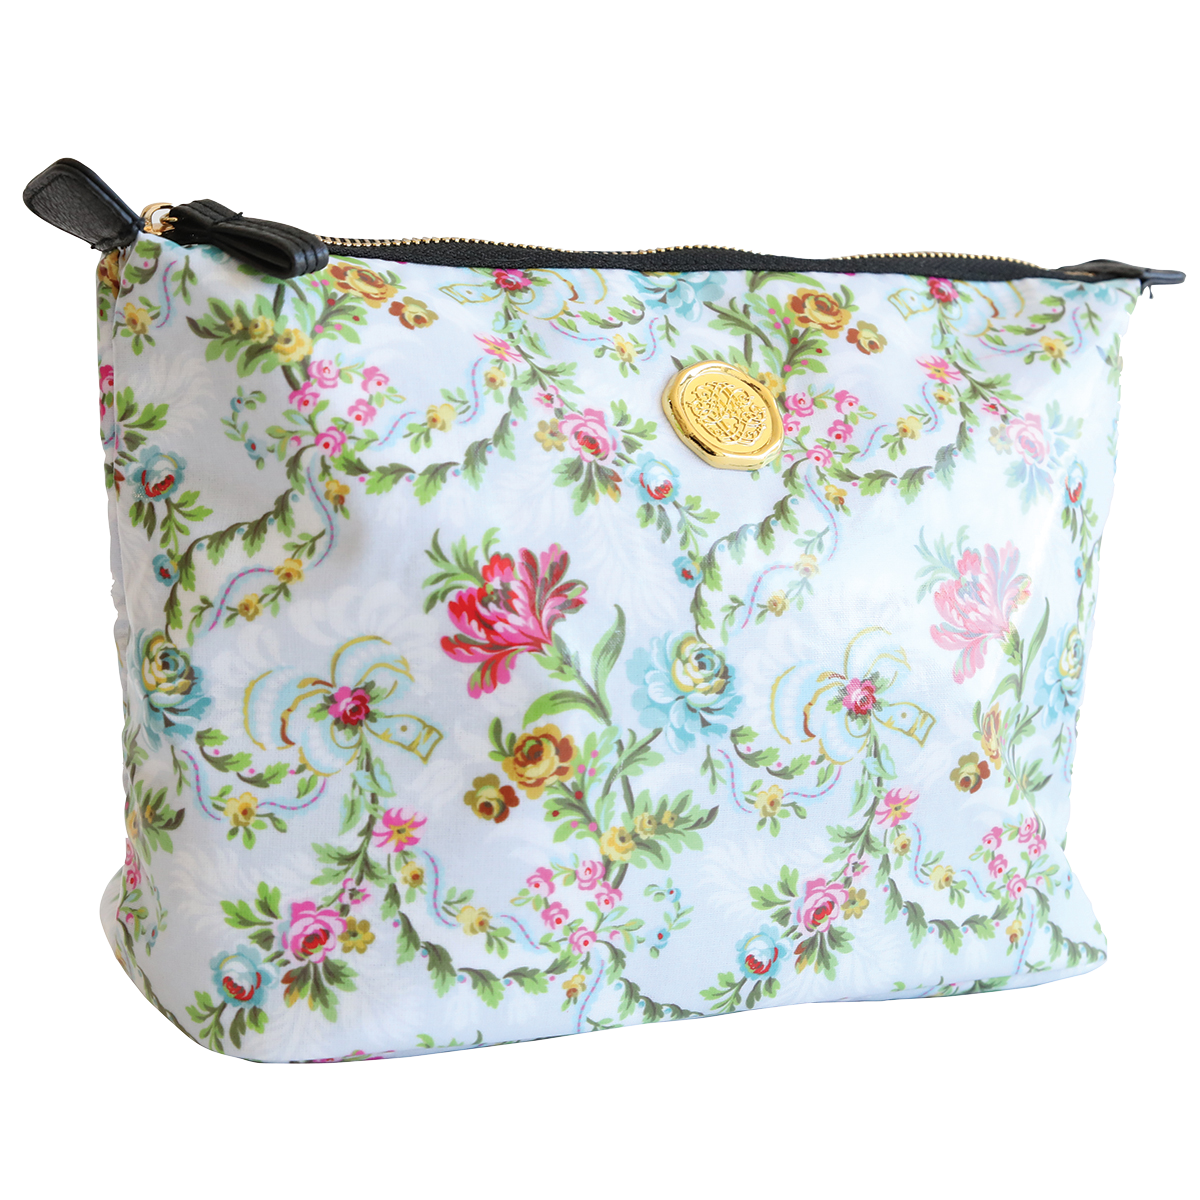 A floral patterned Phoebe Large Cosmetic Bag with a zipper and a branded gold emblem on the front.